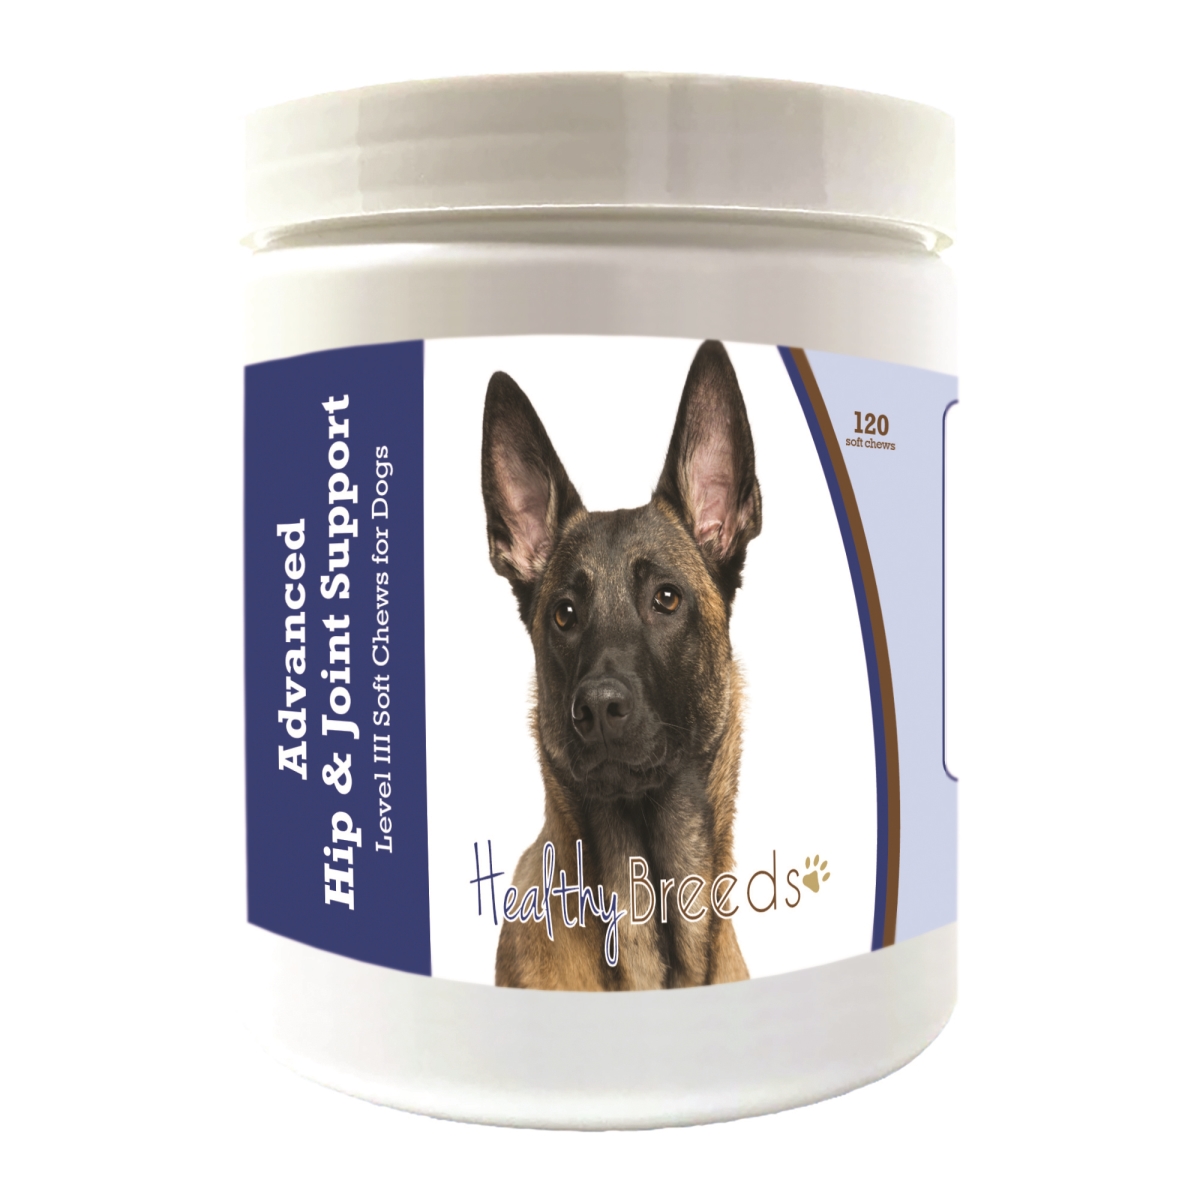 Picture of Healthy Breeds 192959897593 Belgian Malinois Advanced Hip & Joint Support Level III Soft Chews for Dogs